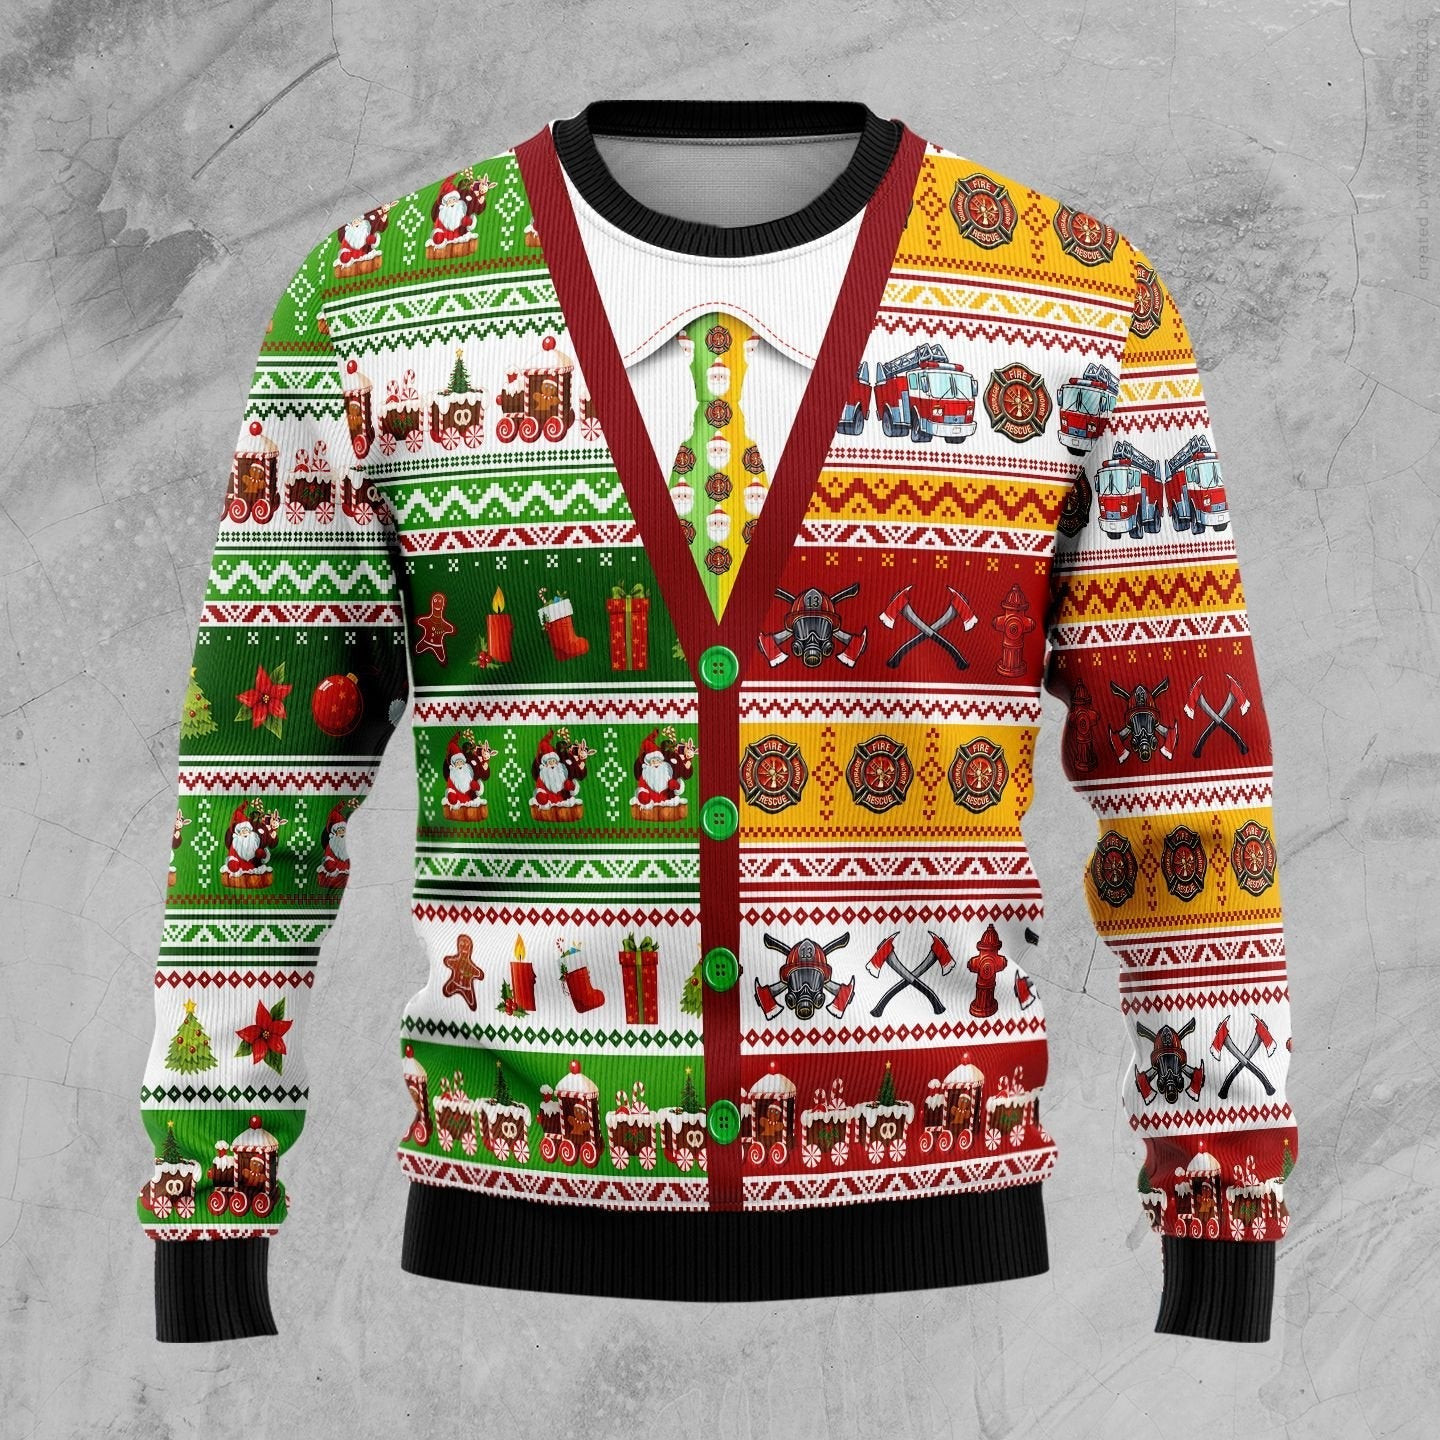 Firefighter Xmas Ugly Christmas Sweater